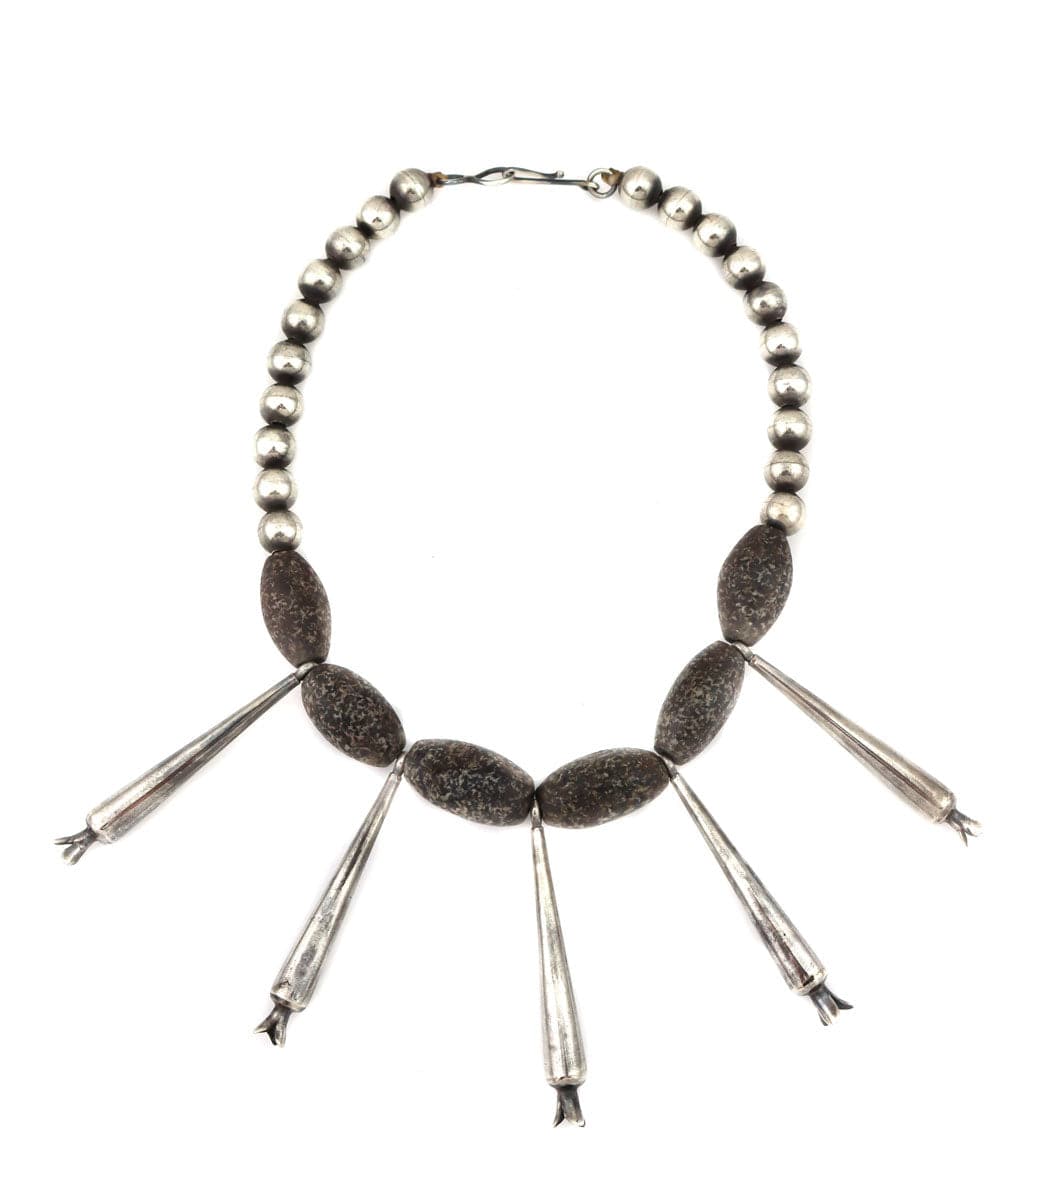 Binary file
Miramontes - Old Style Necklace on Silver Beads with 6 Ancient Oval Granite Beads and 5 Long Silver Blossoms, 16.5" Length (J91305-1221-013)